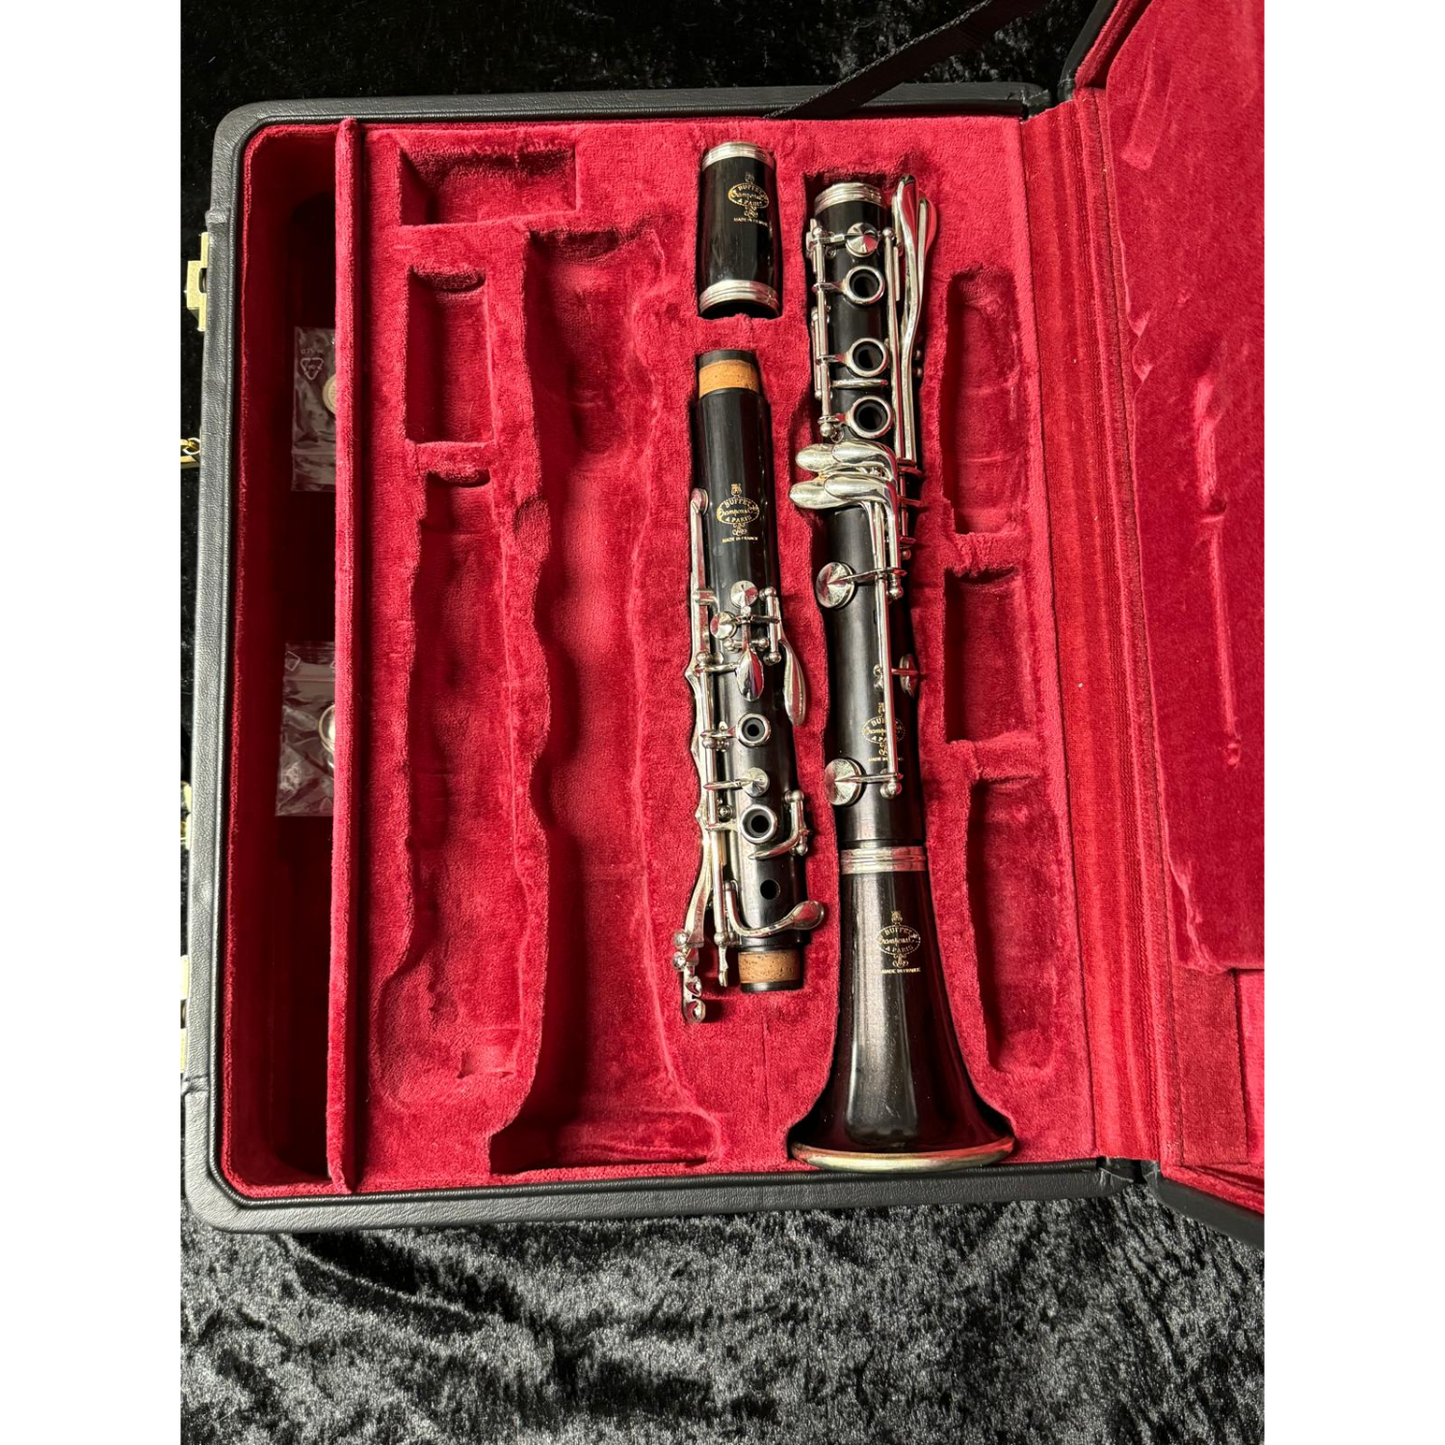 Birds eye view of Buffet R13 A clarinet resting in case